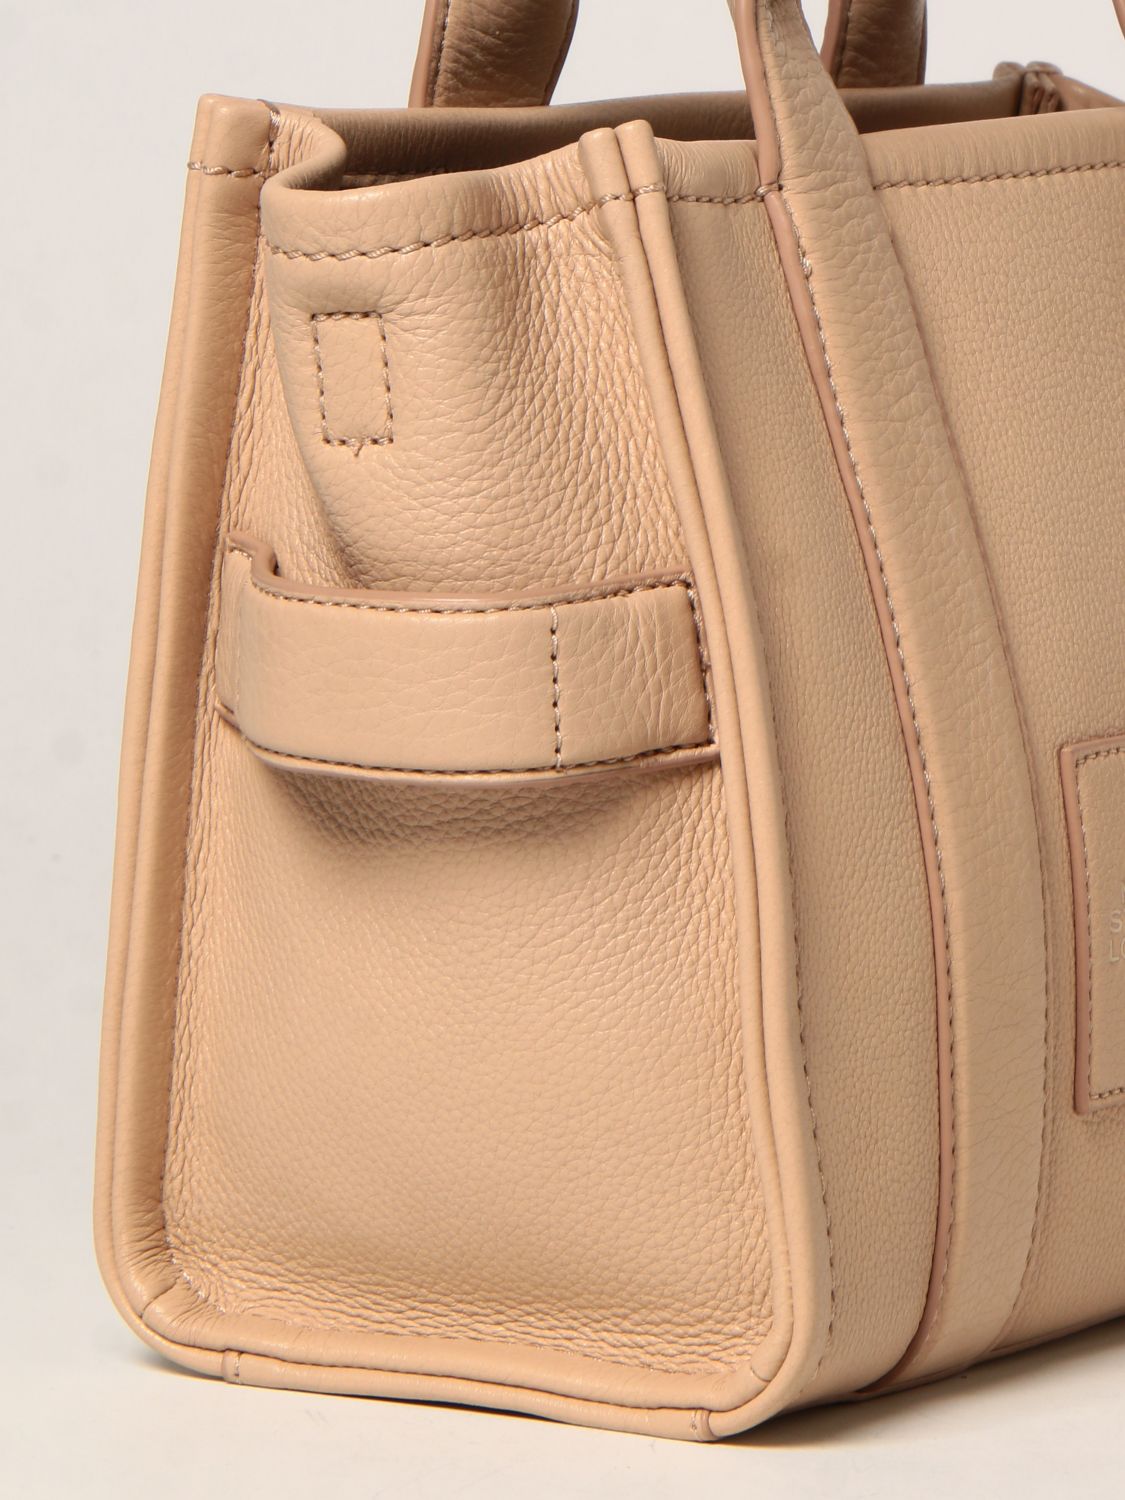 marc jacobs tote bag beige small leather｜TikTok Search